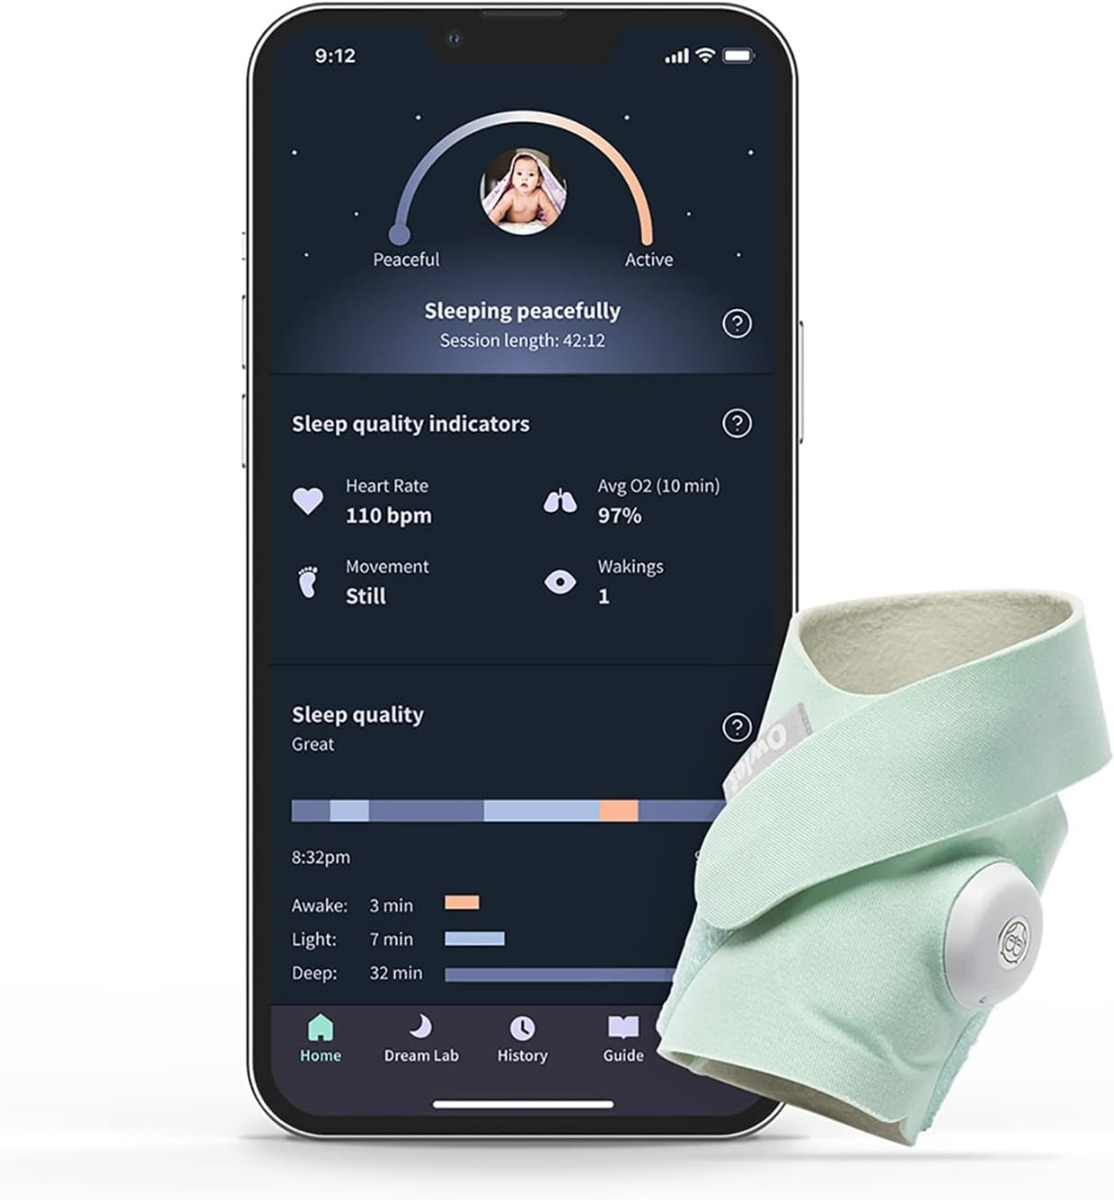  Owlet Dream Sock - Smart Baby Monitor View Heart Rate and Average Oxygen O2 as Sleep Quality Indicators